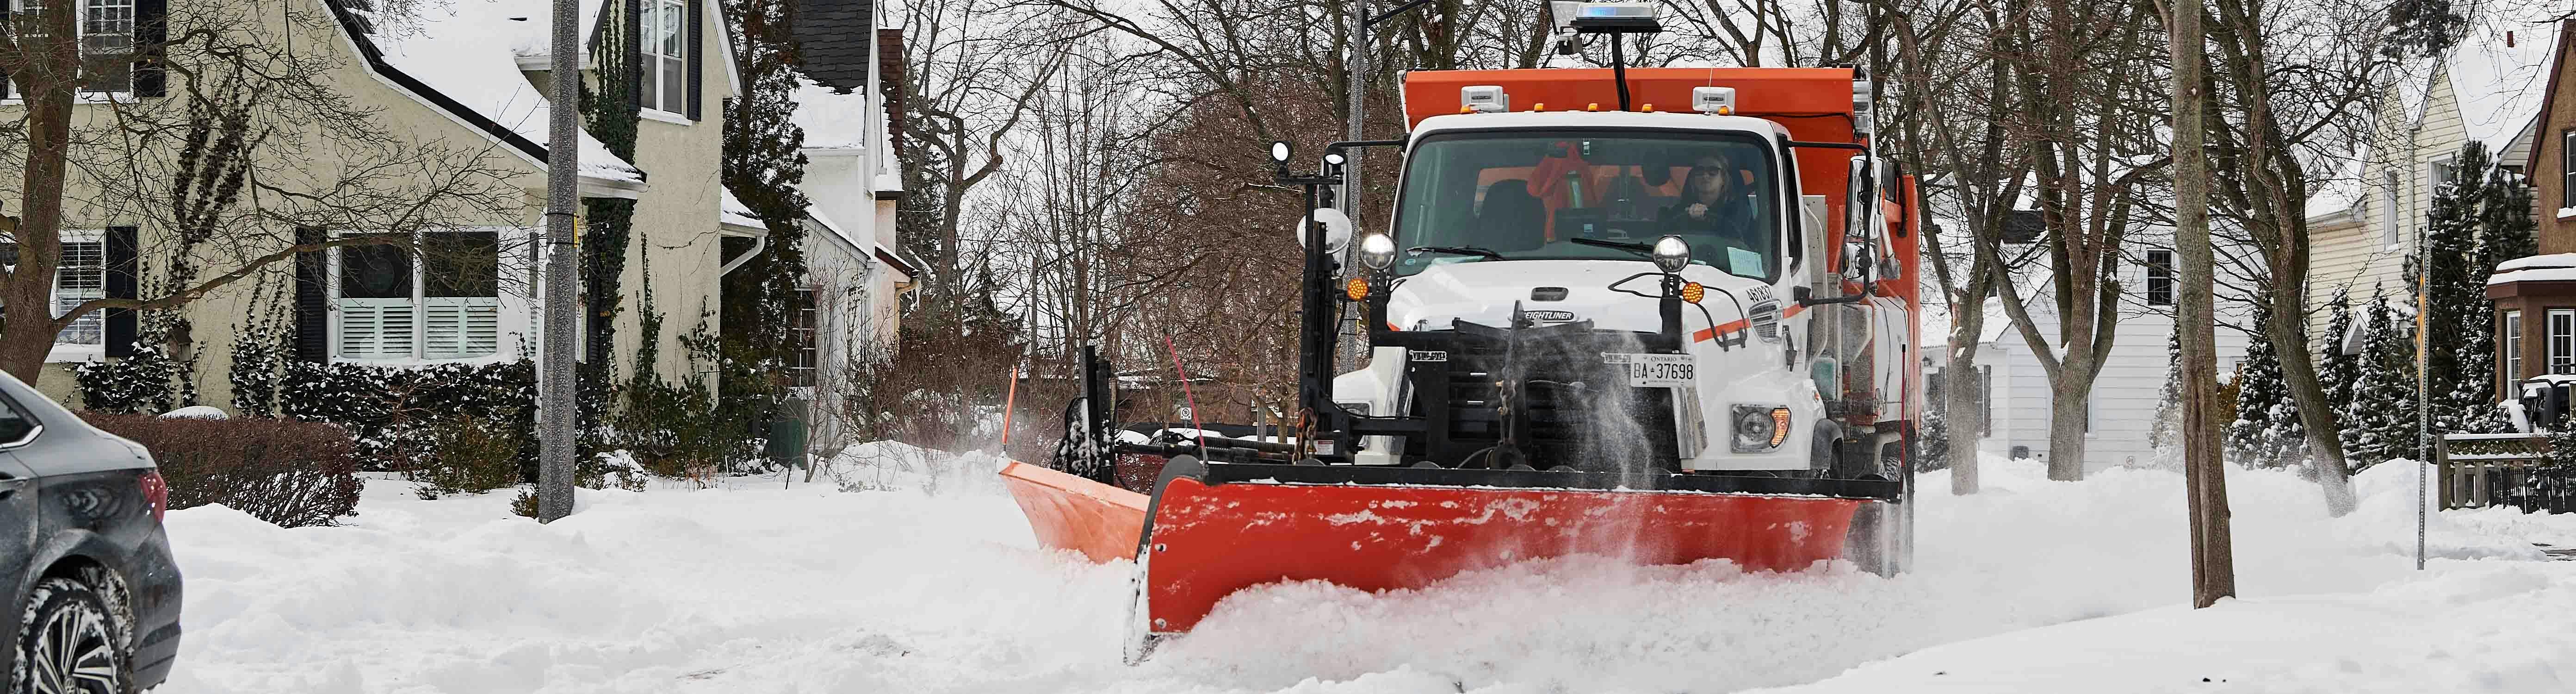 A City of Brantford snowplow clearing streets of snow